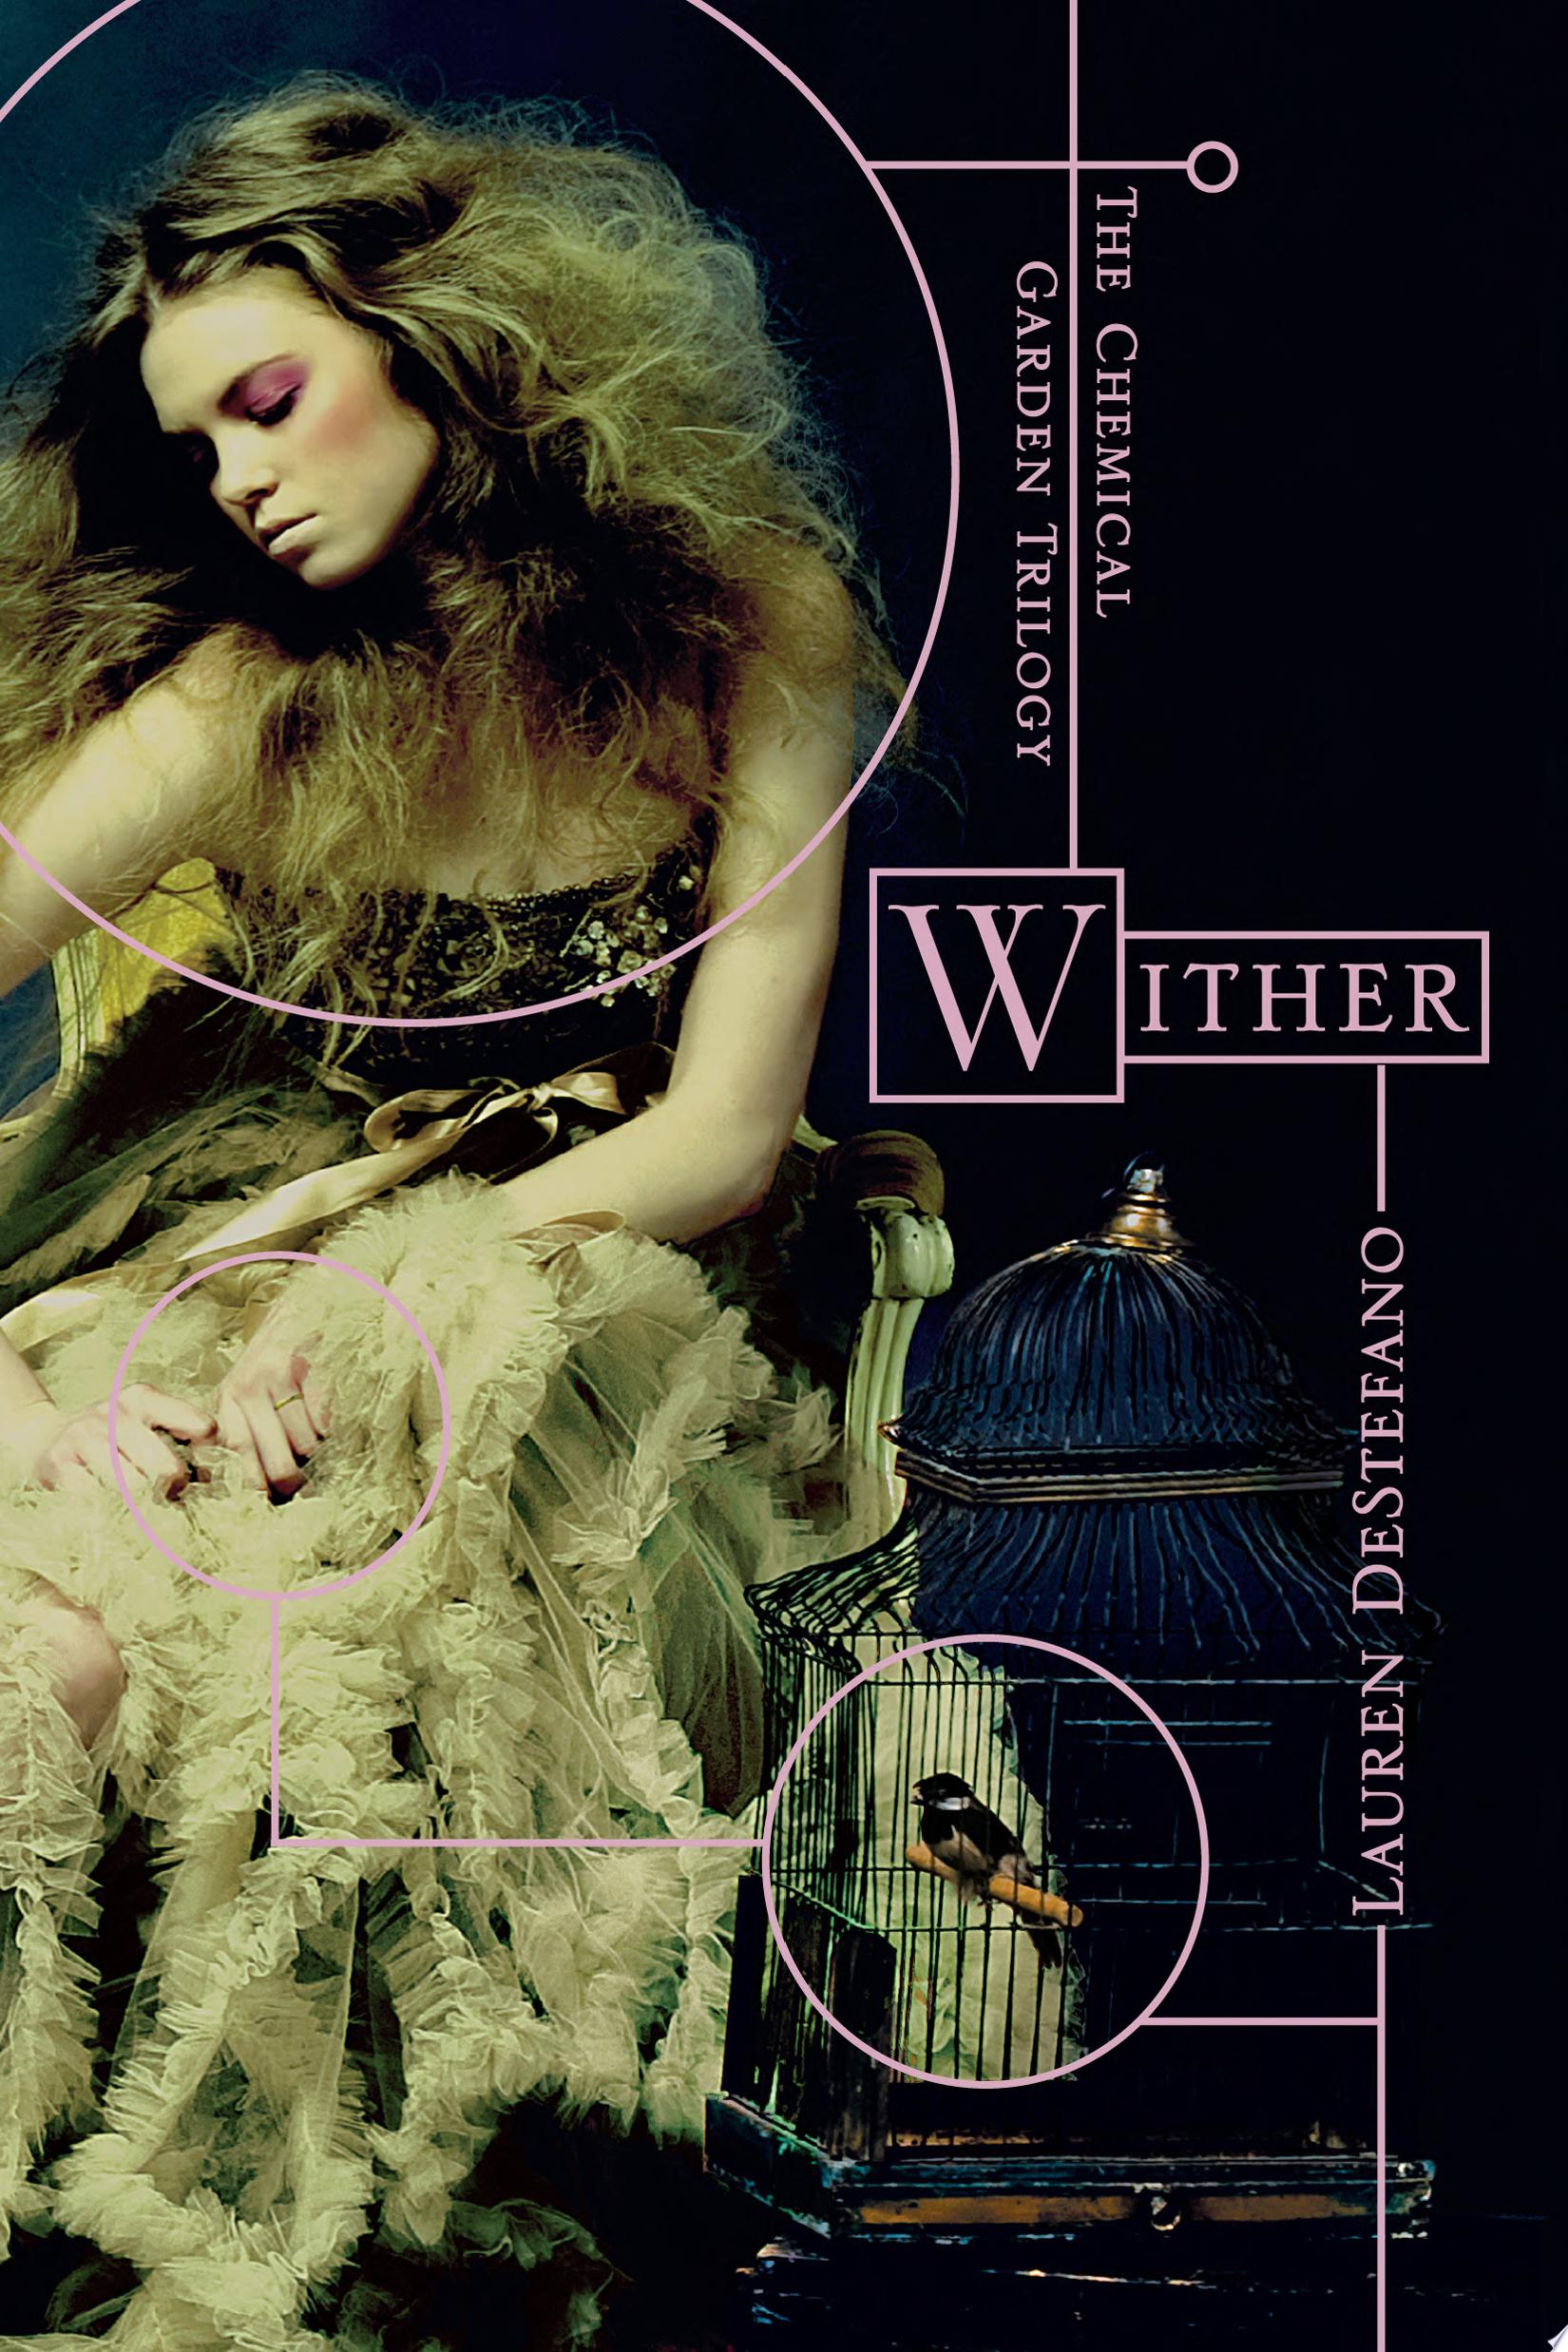 Image for "Wither"